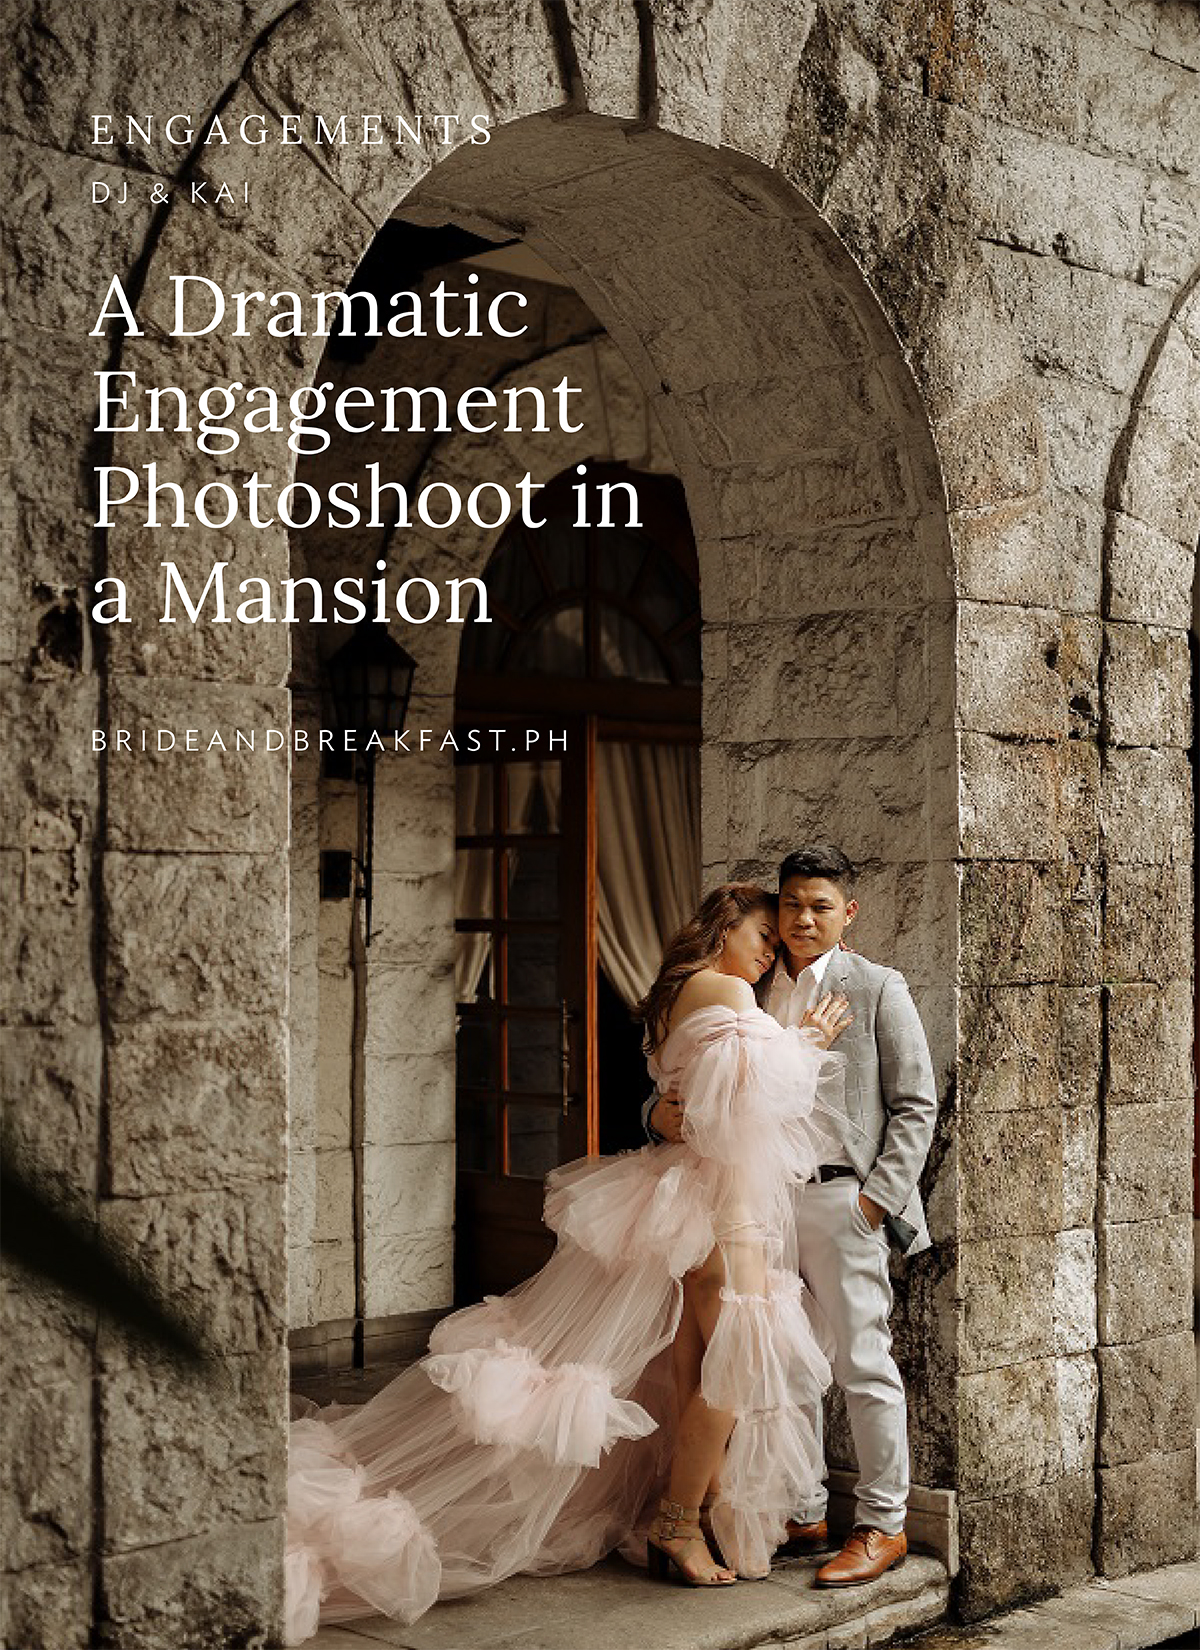 A Dramatic Engagement Photoshoot in a Mansion